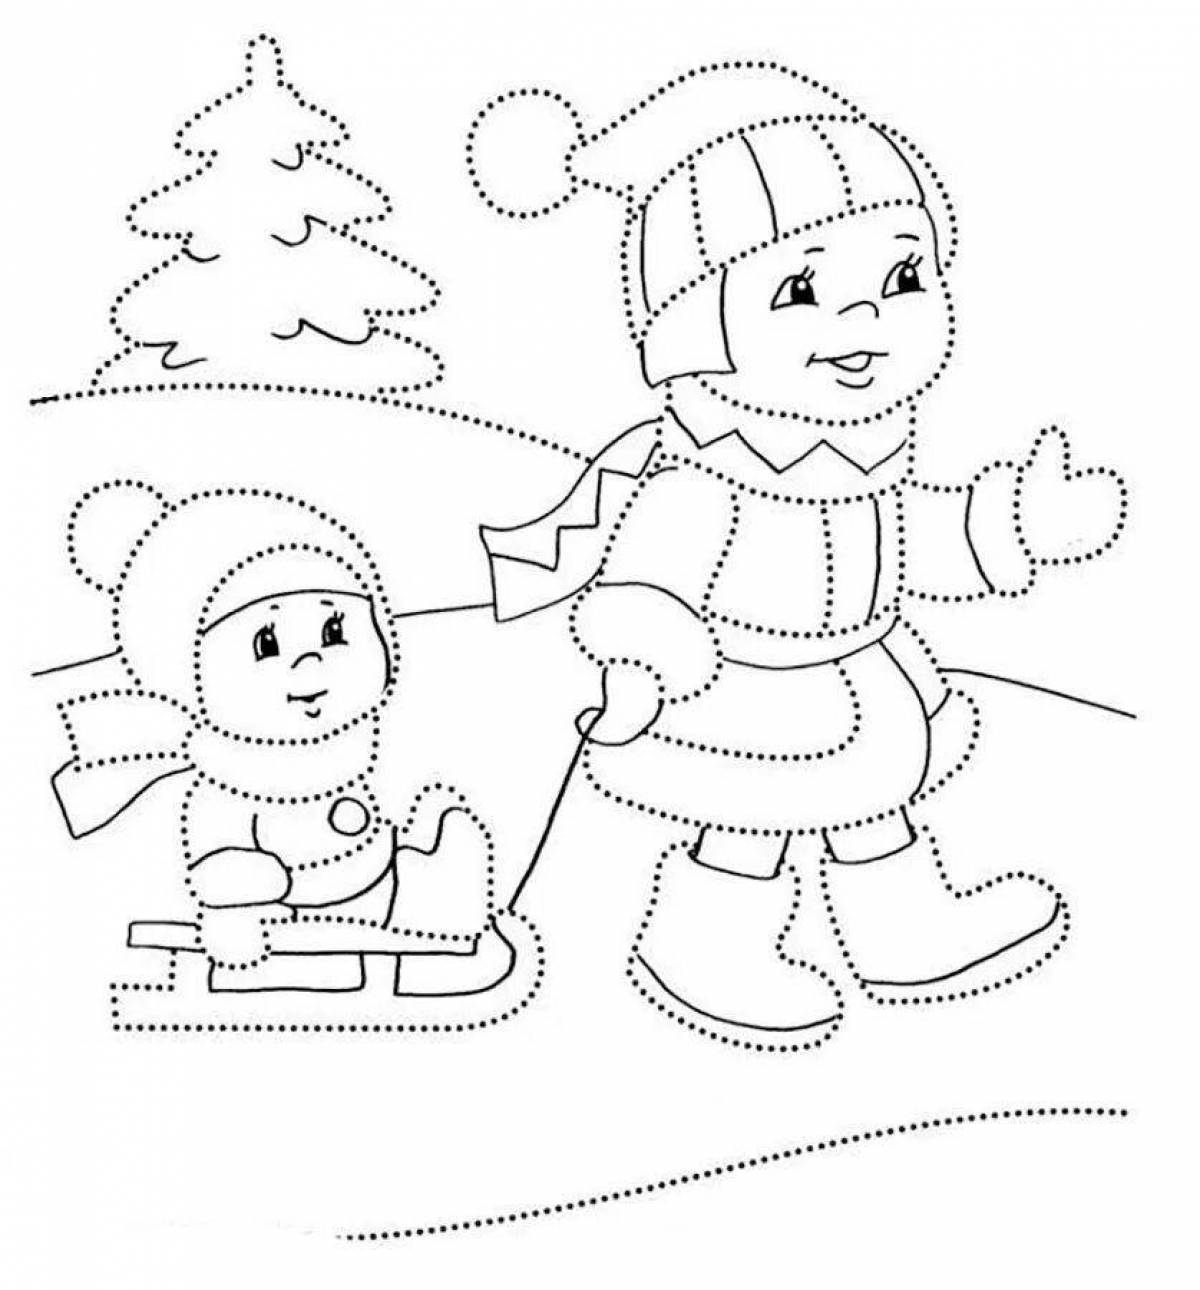 Animated winter fun coloring page